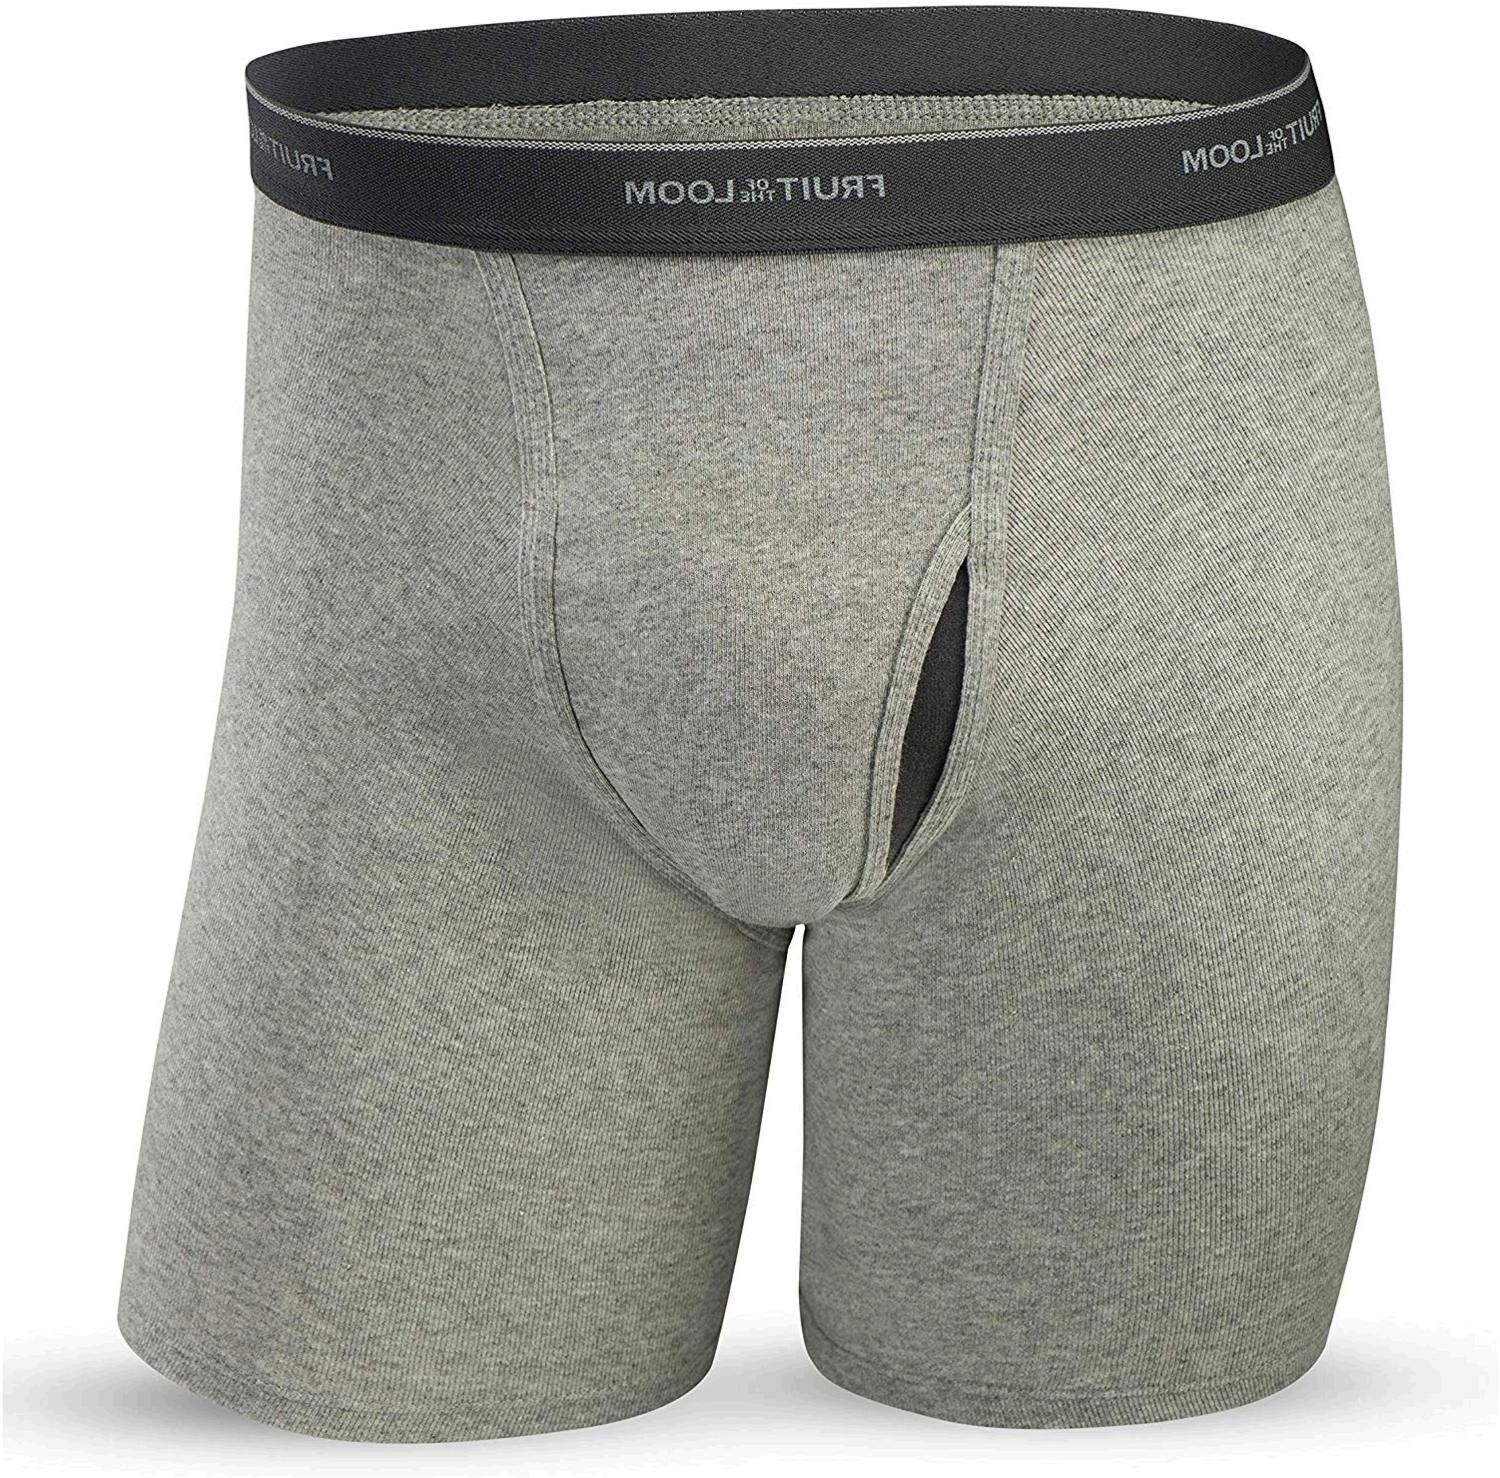 Fruit of the loom men's no ride up boxer brief